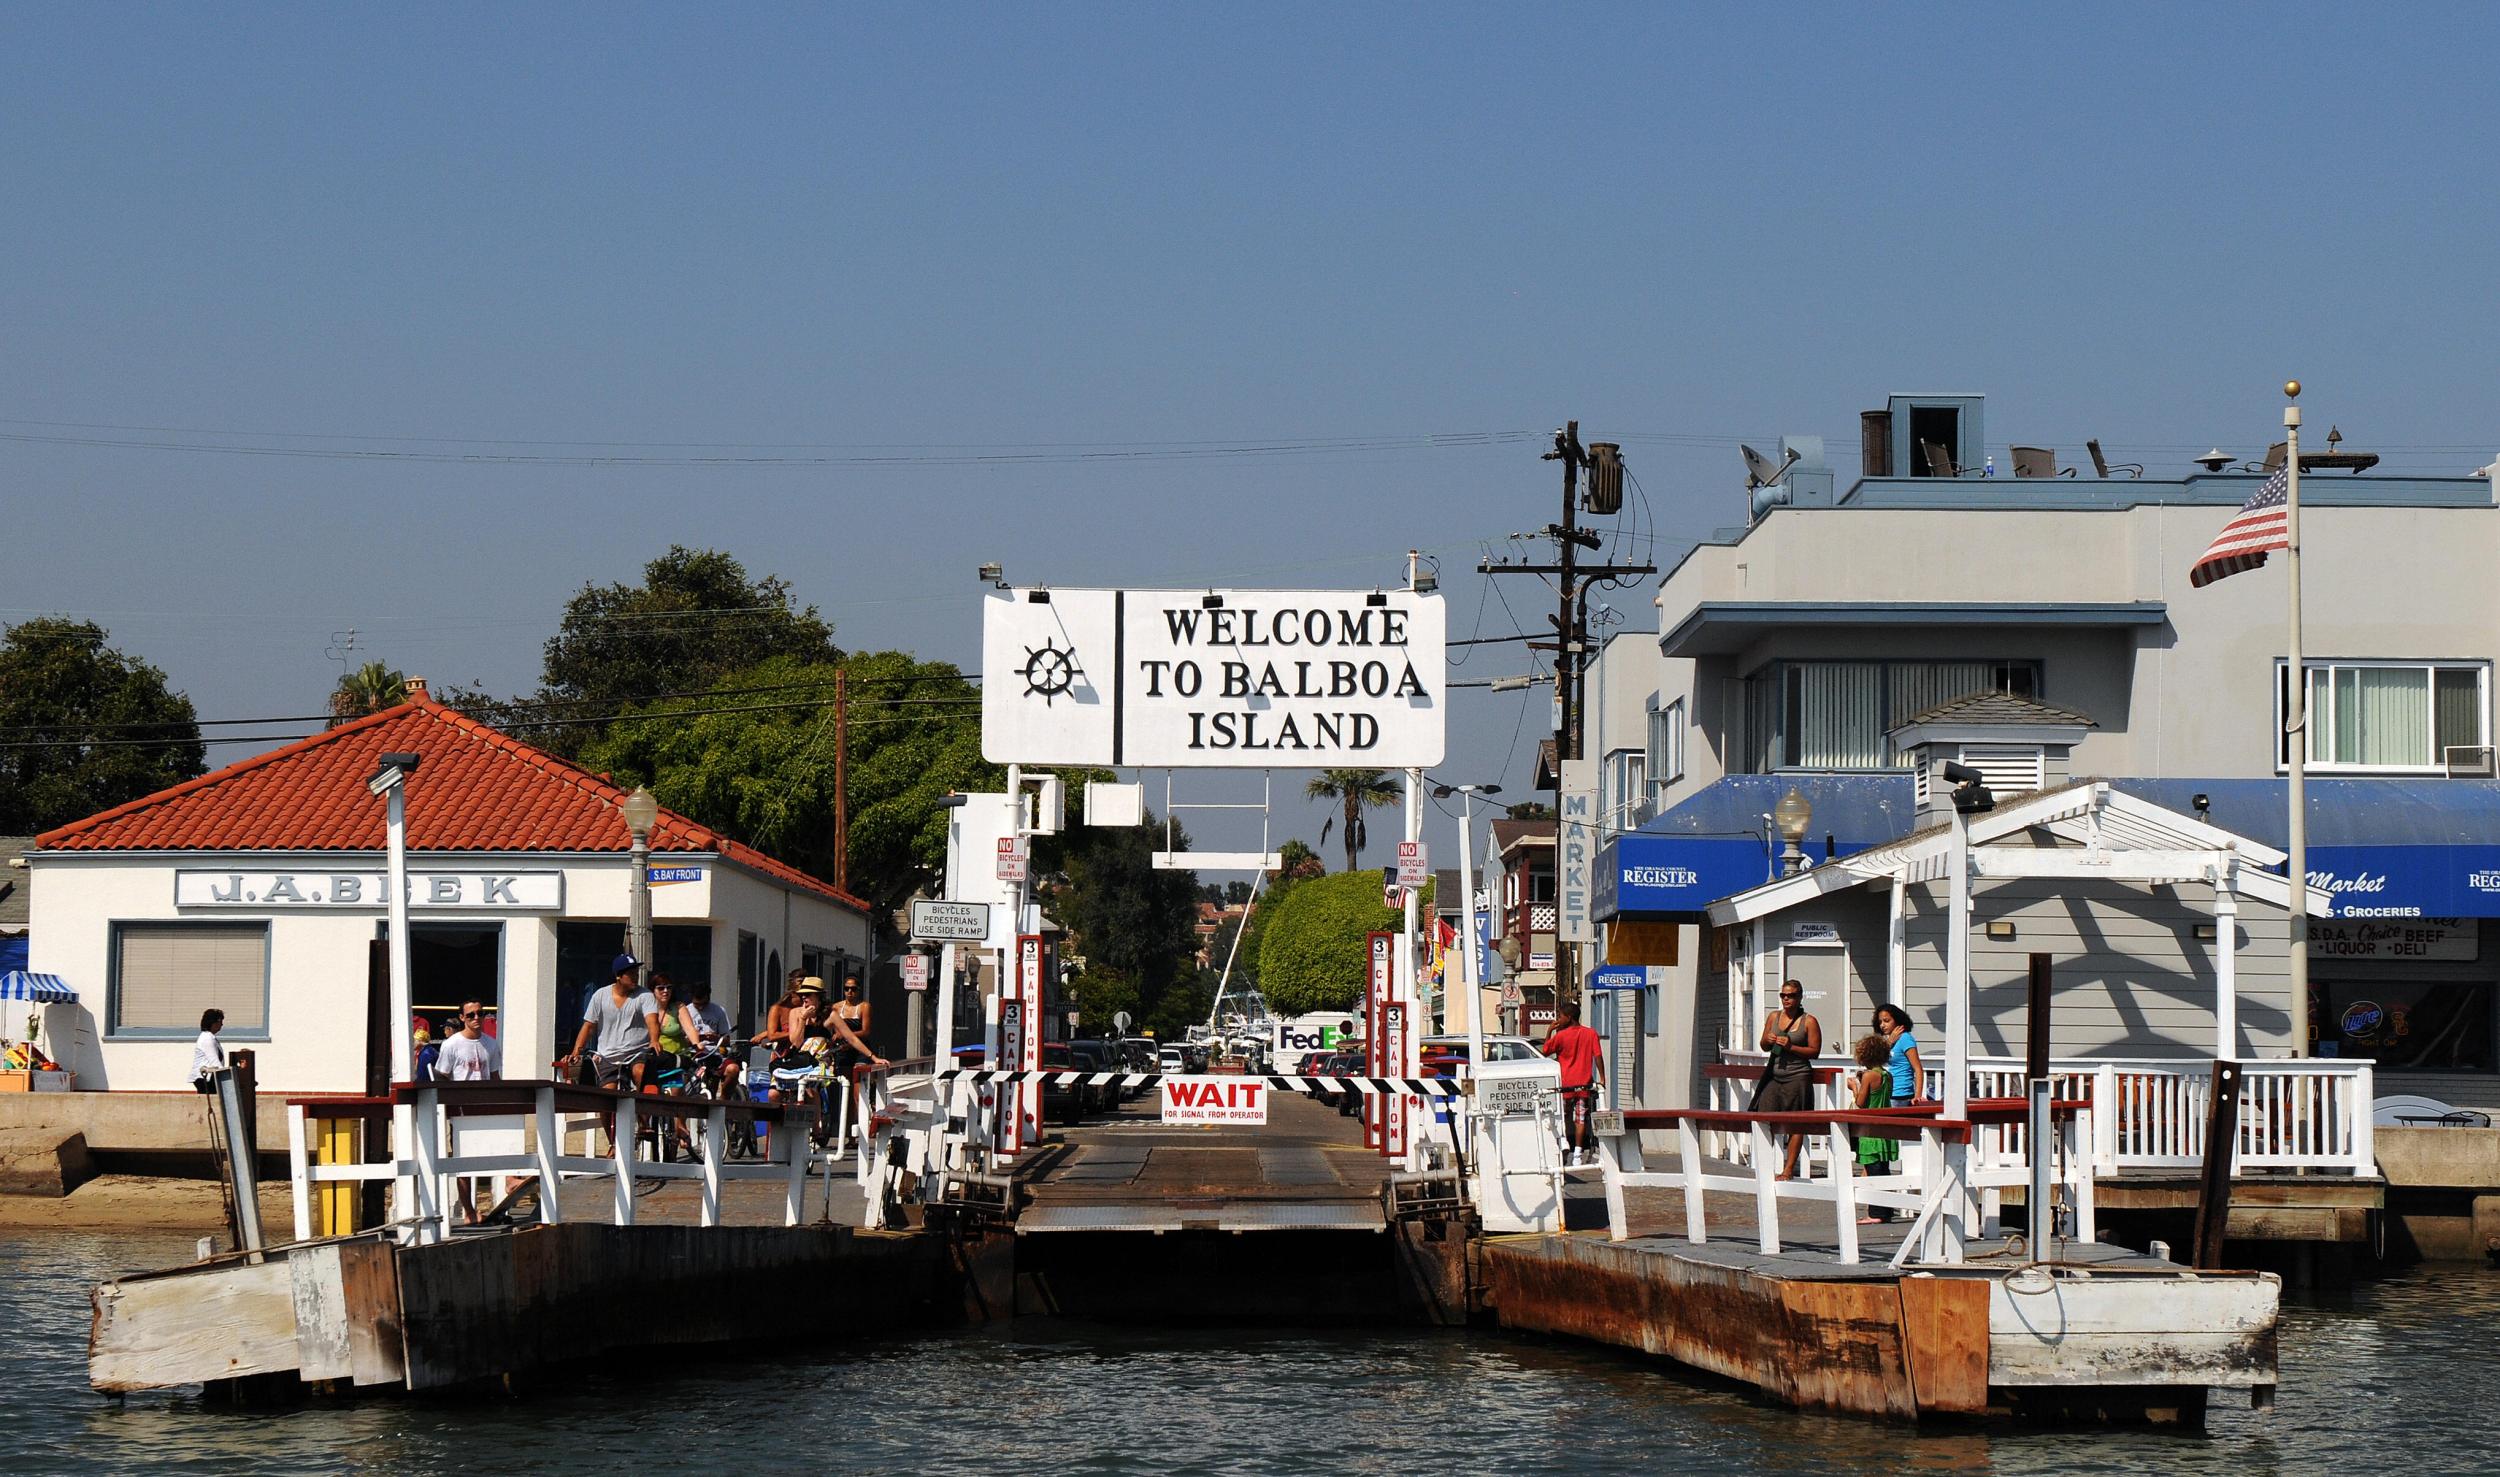 The ferry to Balboa Island has been running for almost a century